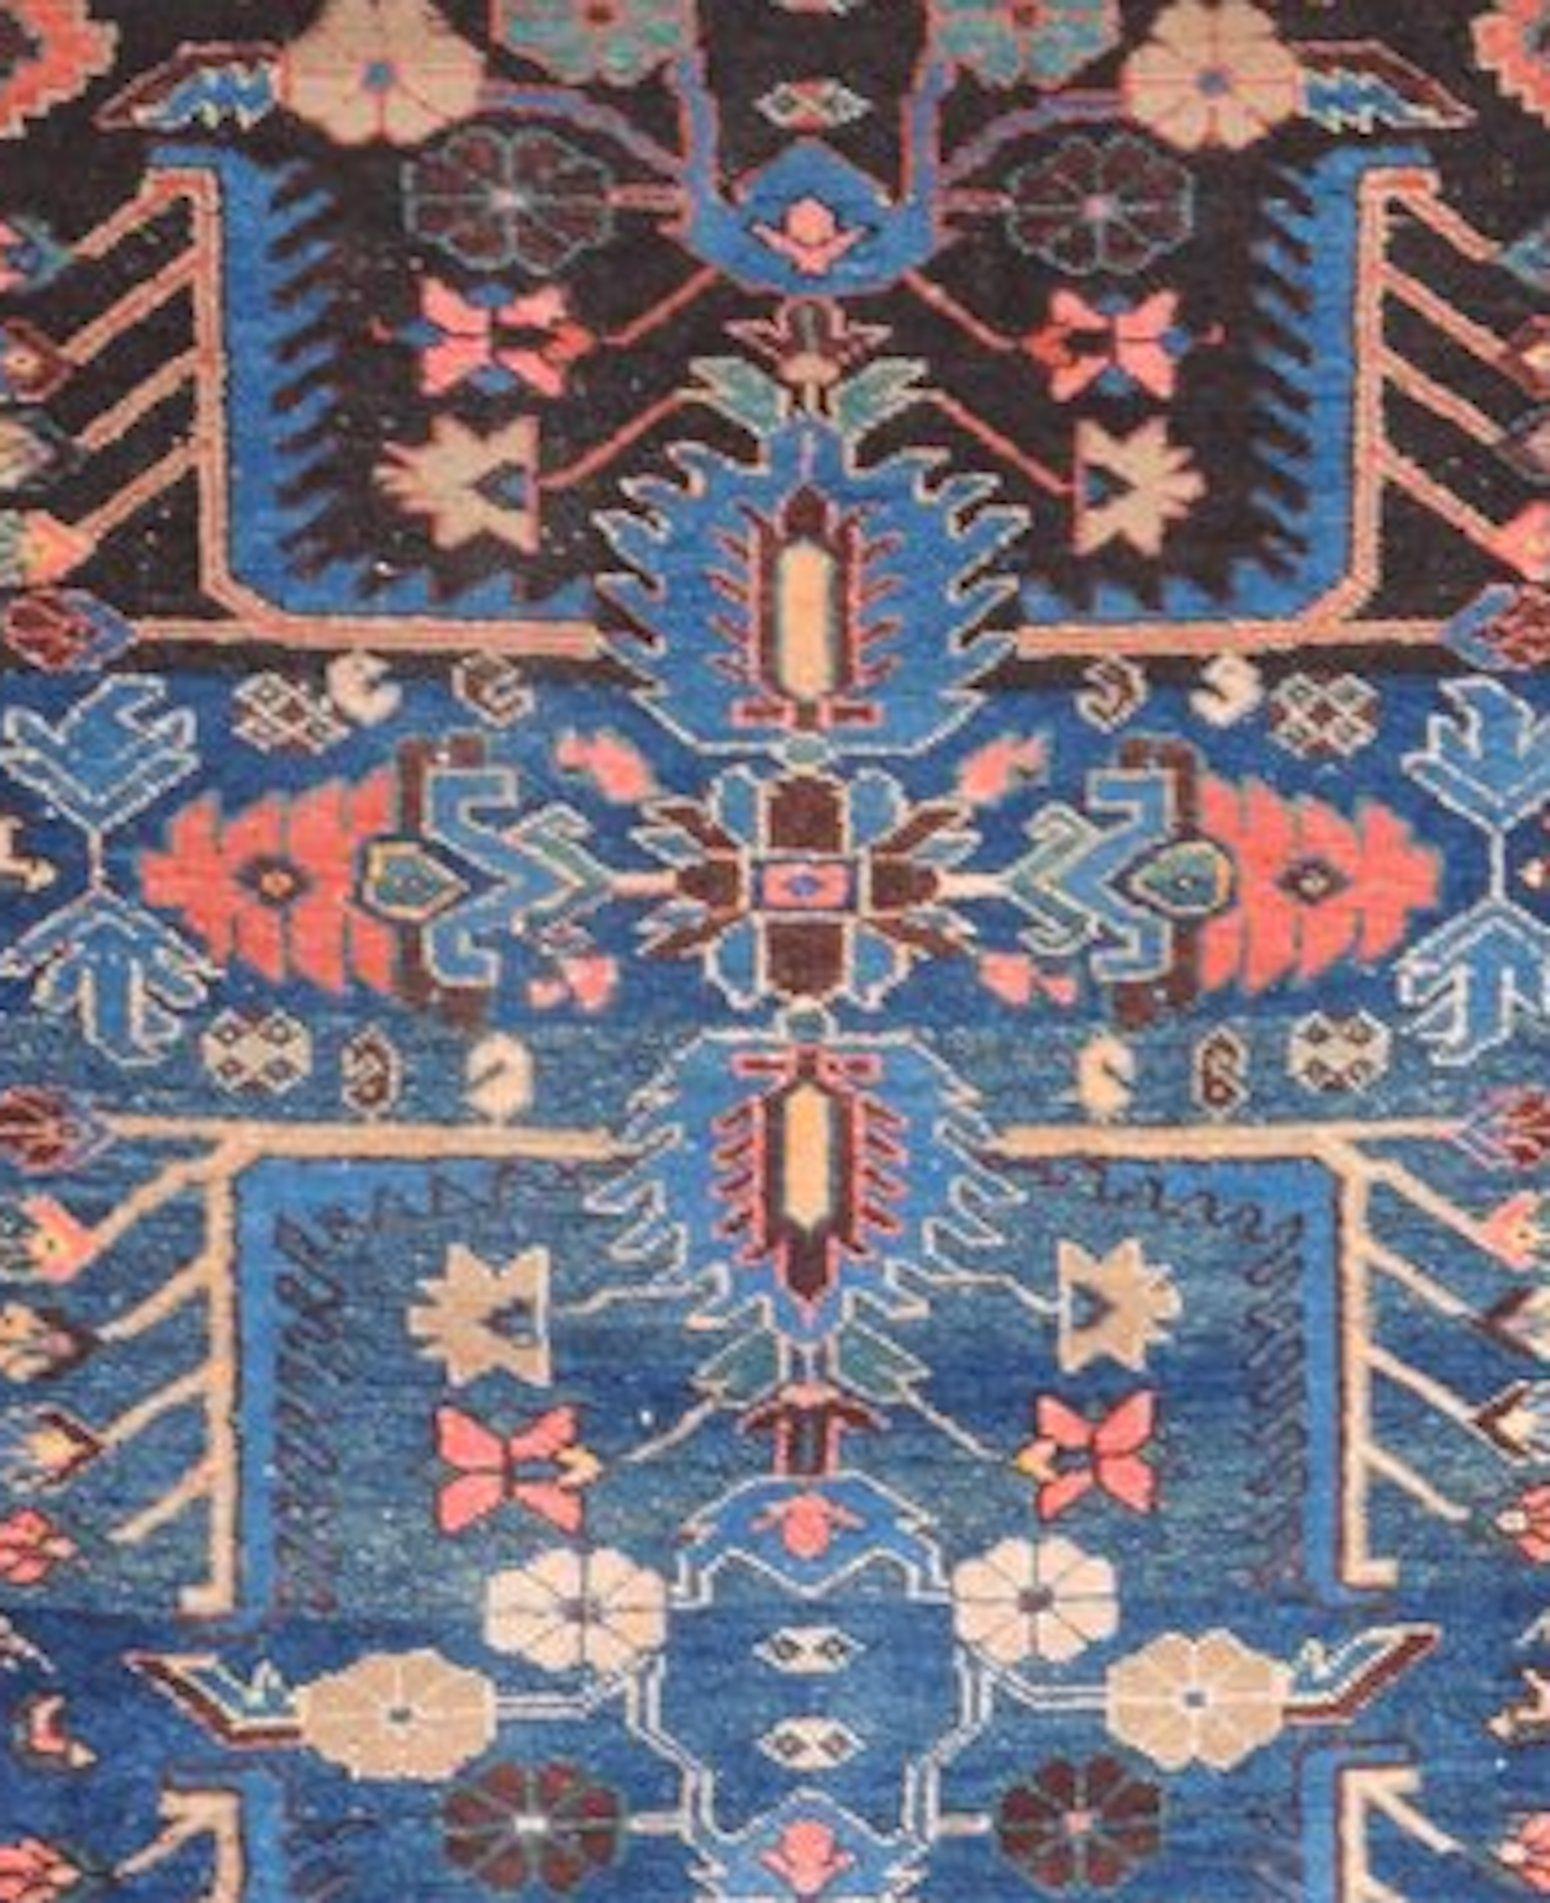 Early 20th Century Small Persian Carpet in Deep Blue and Wine Colors, circa 1900